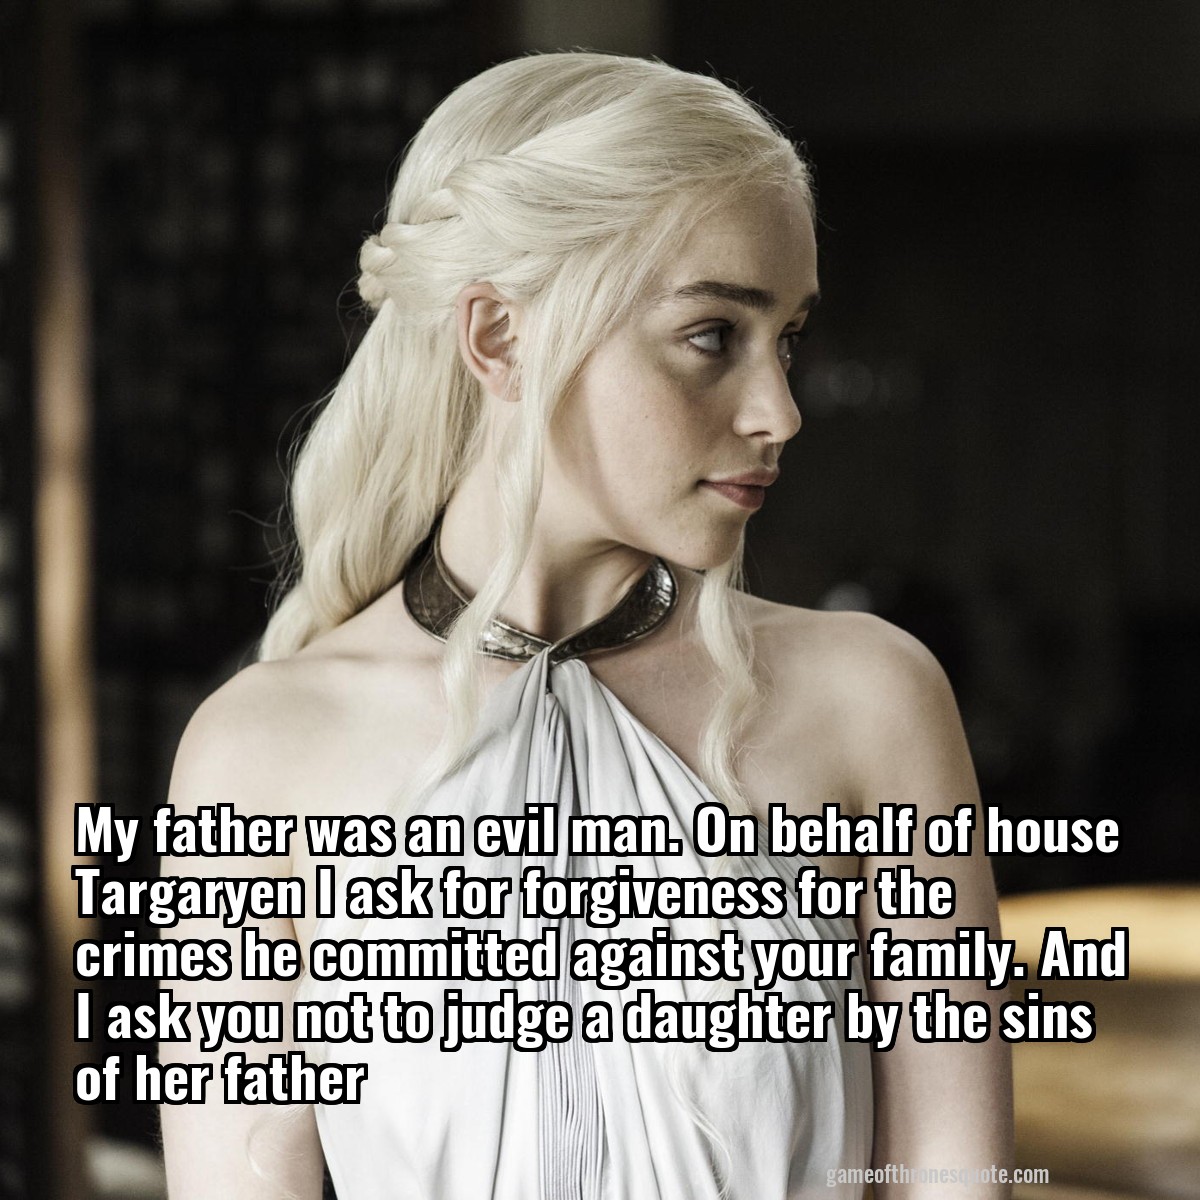 My father was an evil man. On behalf of house Targaryen I ask for forgiveness for the crimes he committed against your family. And I ask you not to judge a daughter by the sins of her father